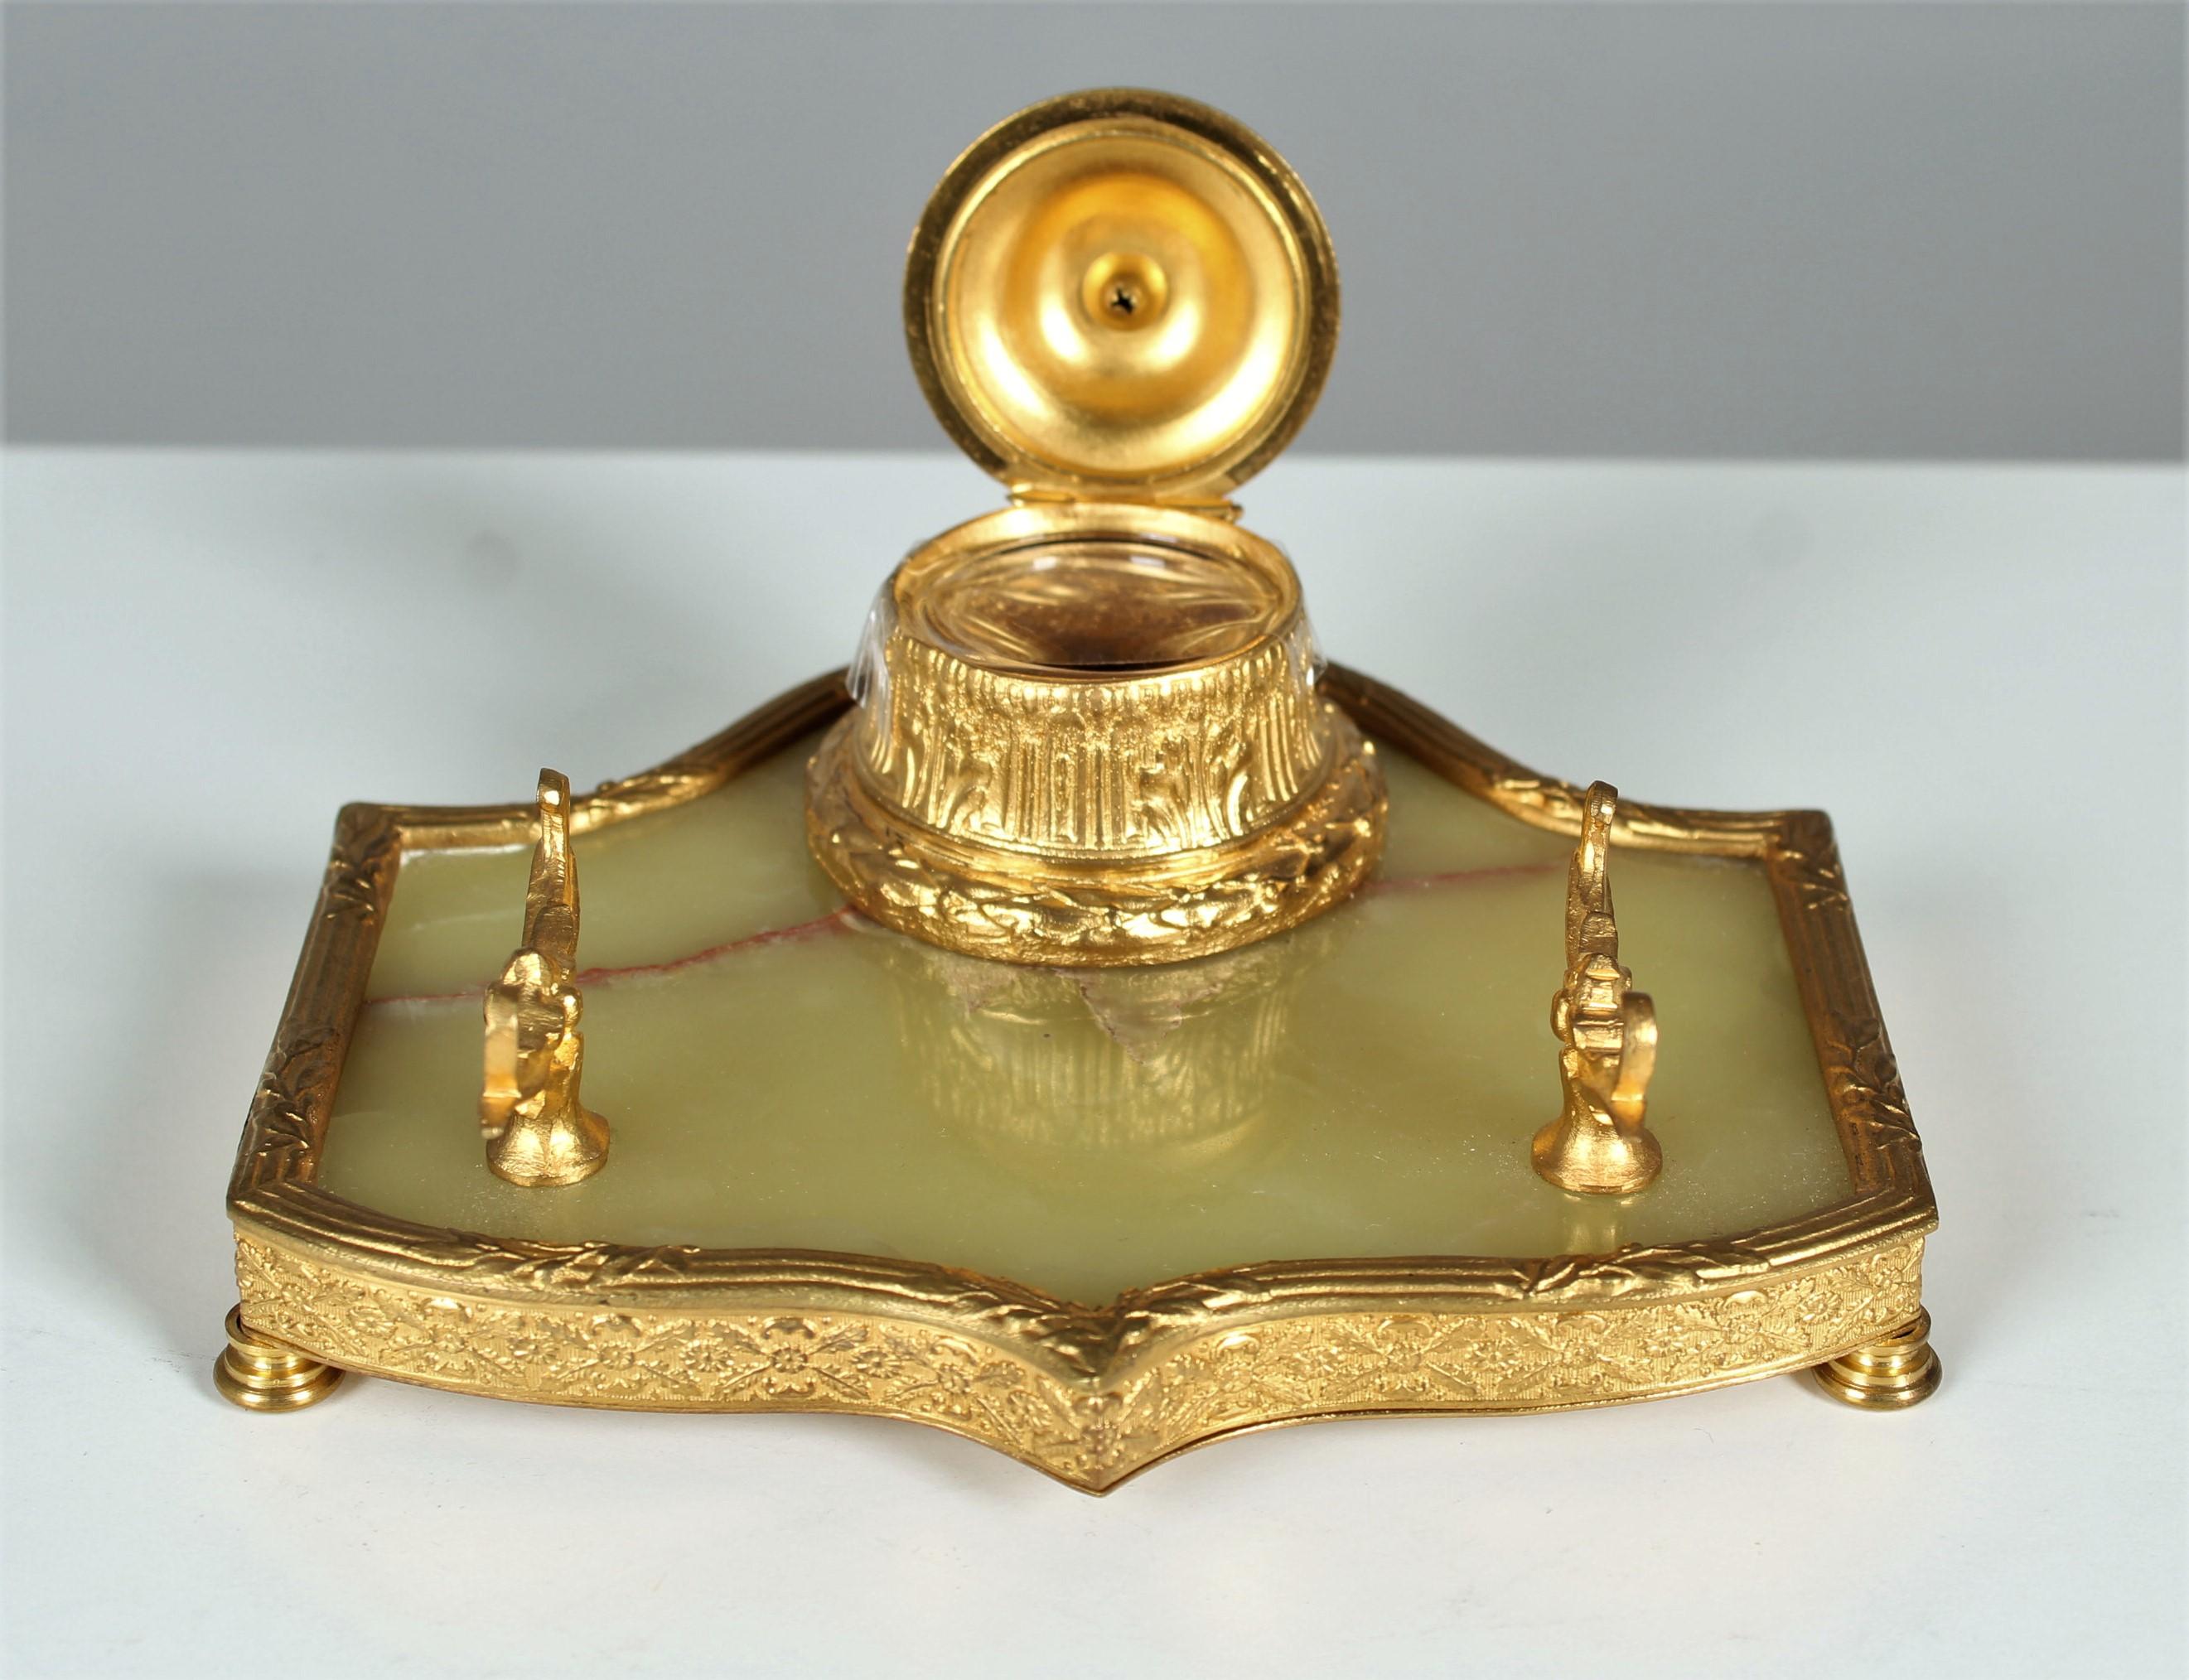 Beautiful antique inkwell made from gilded bronze.
circa 1880.
The plate is made of marble.
Nice bronze work with a well preserved gilding.
The original glass insert is existing.

